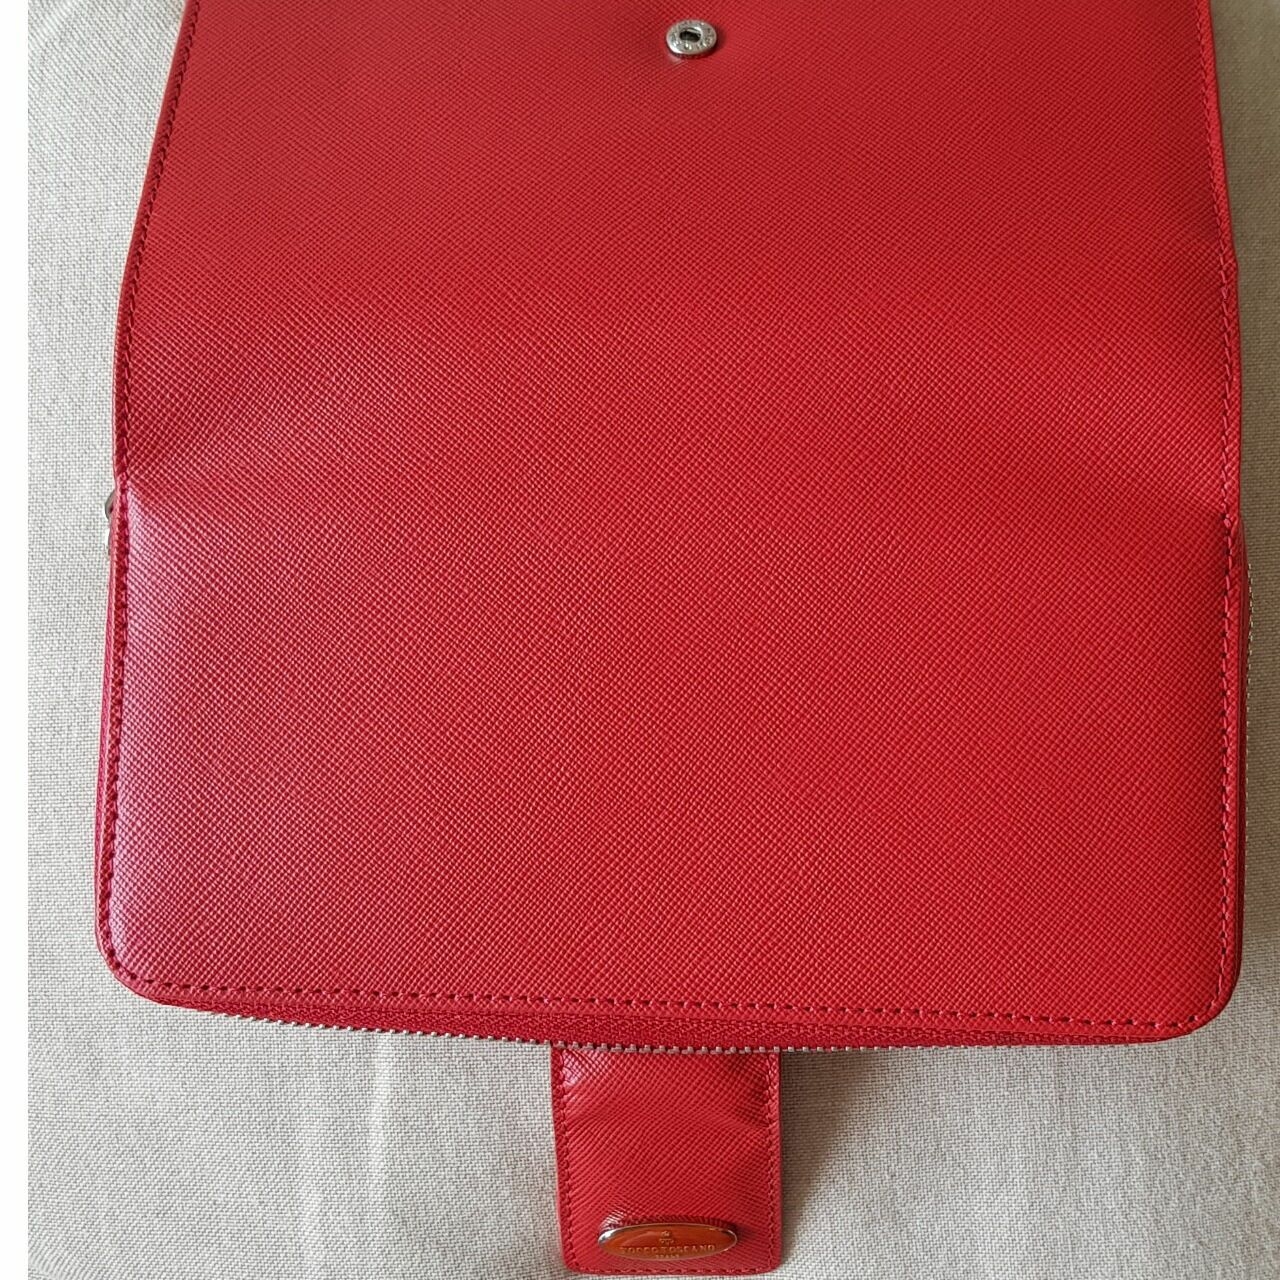 Tocco Toscano Red Dompet